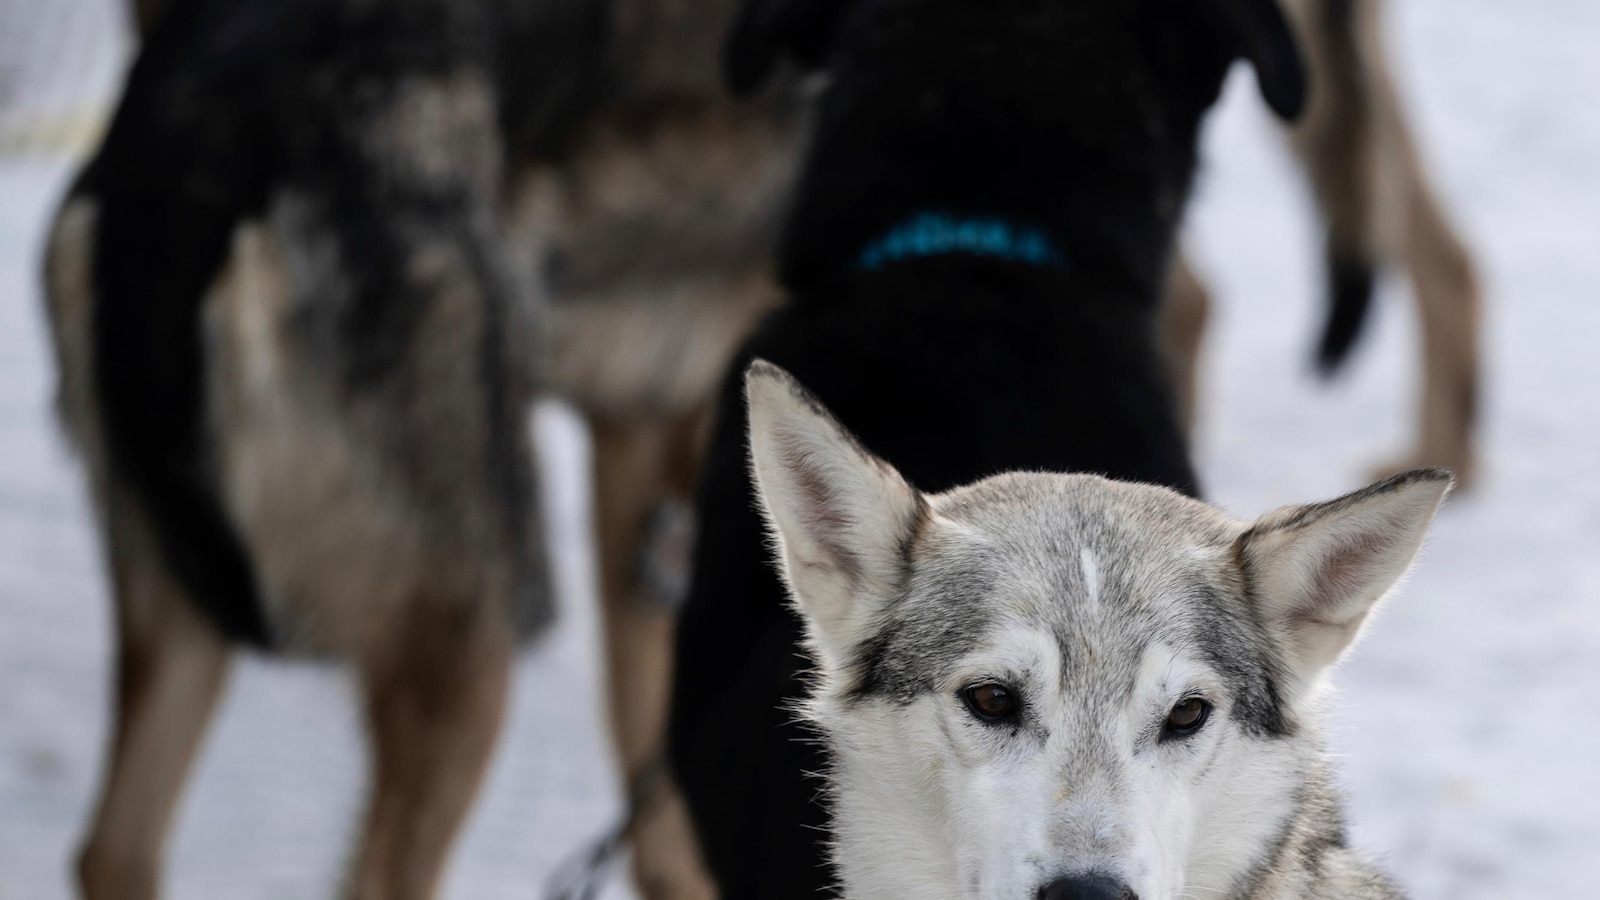 Calls for End to Iditarod Renewed Following Recent Dog Deaths in the Endurance Race with Strong Ties to Alaska Tradition